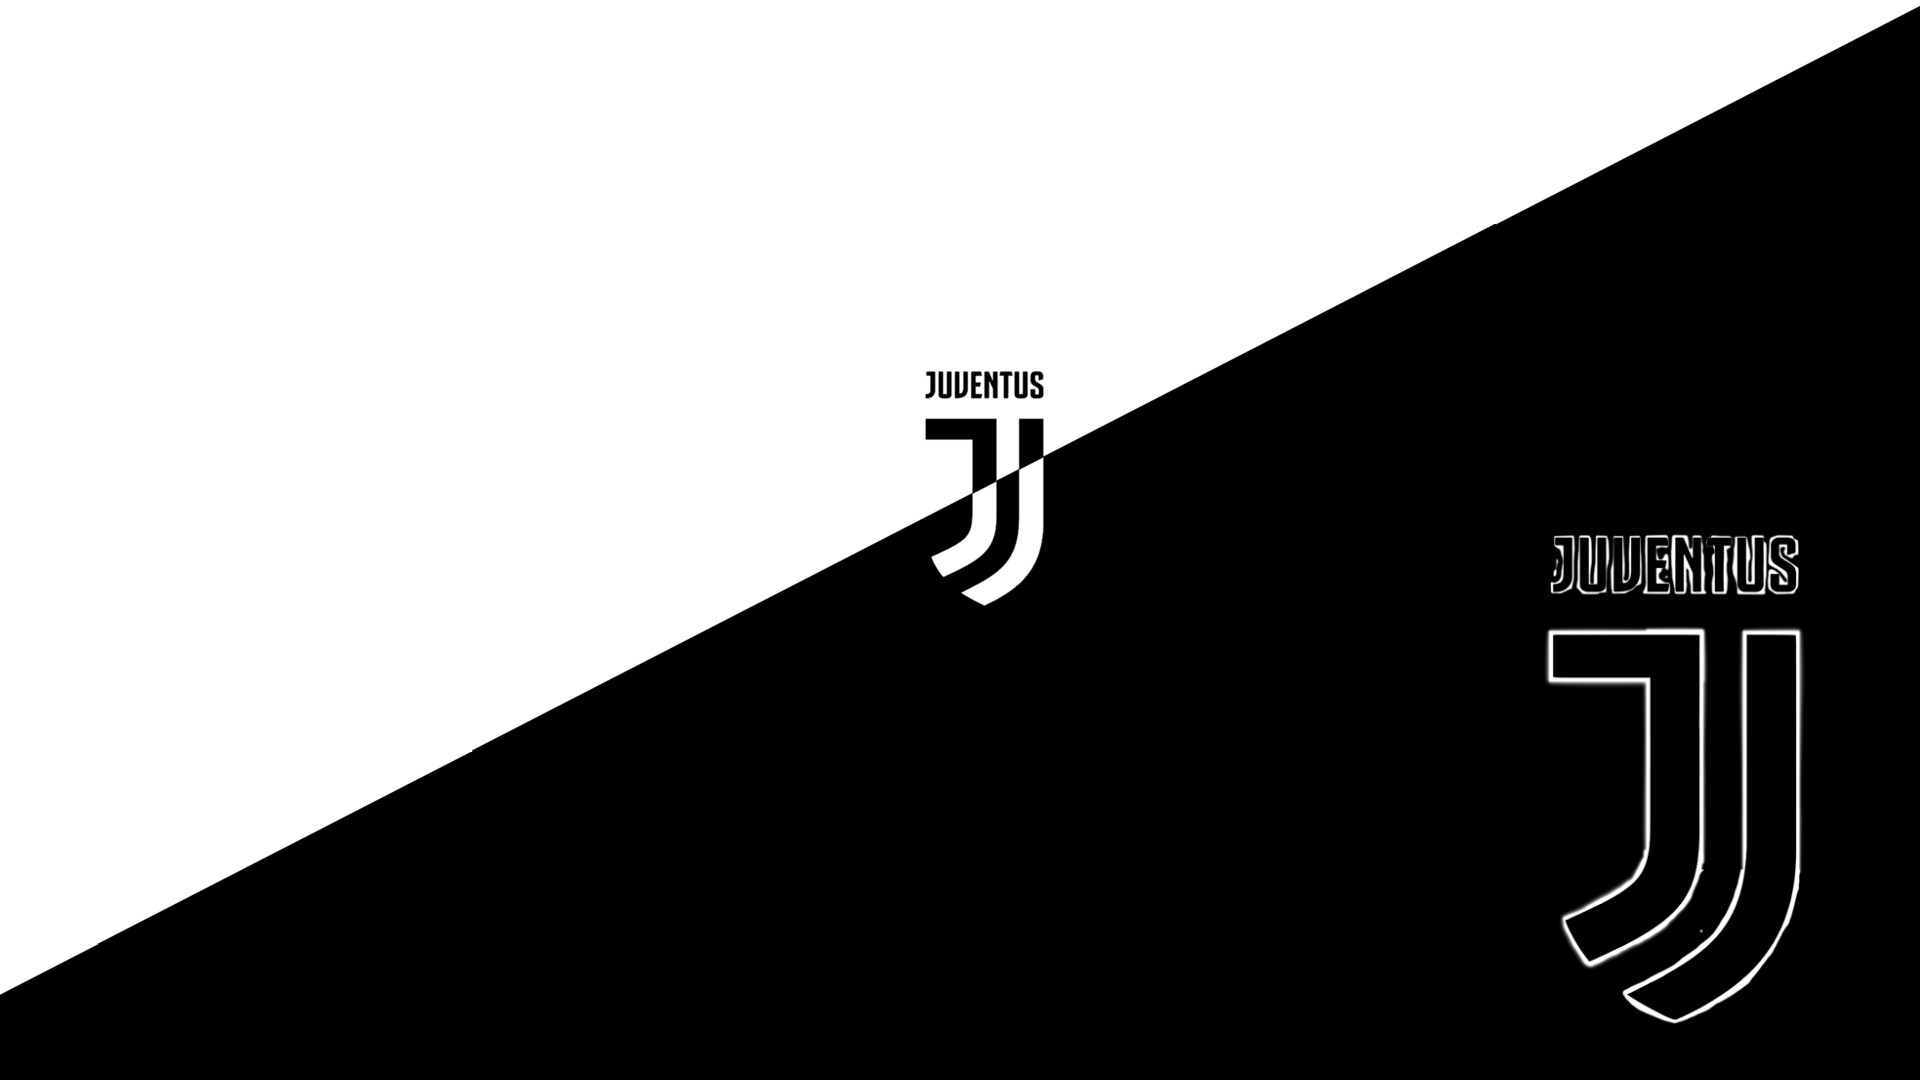 Juventus Logo Wallpaper HD with resolution 1920x1080 pixel. You can make this wallpaper for your Mac or Windows Desktop Background, iPhone, Android or Tablet and another Smartphone device